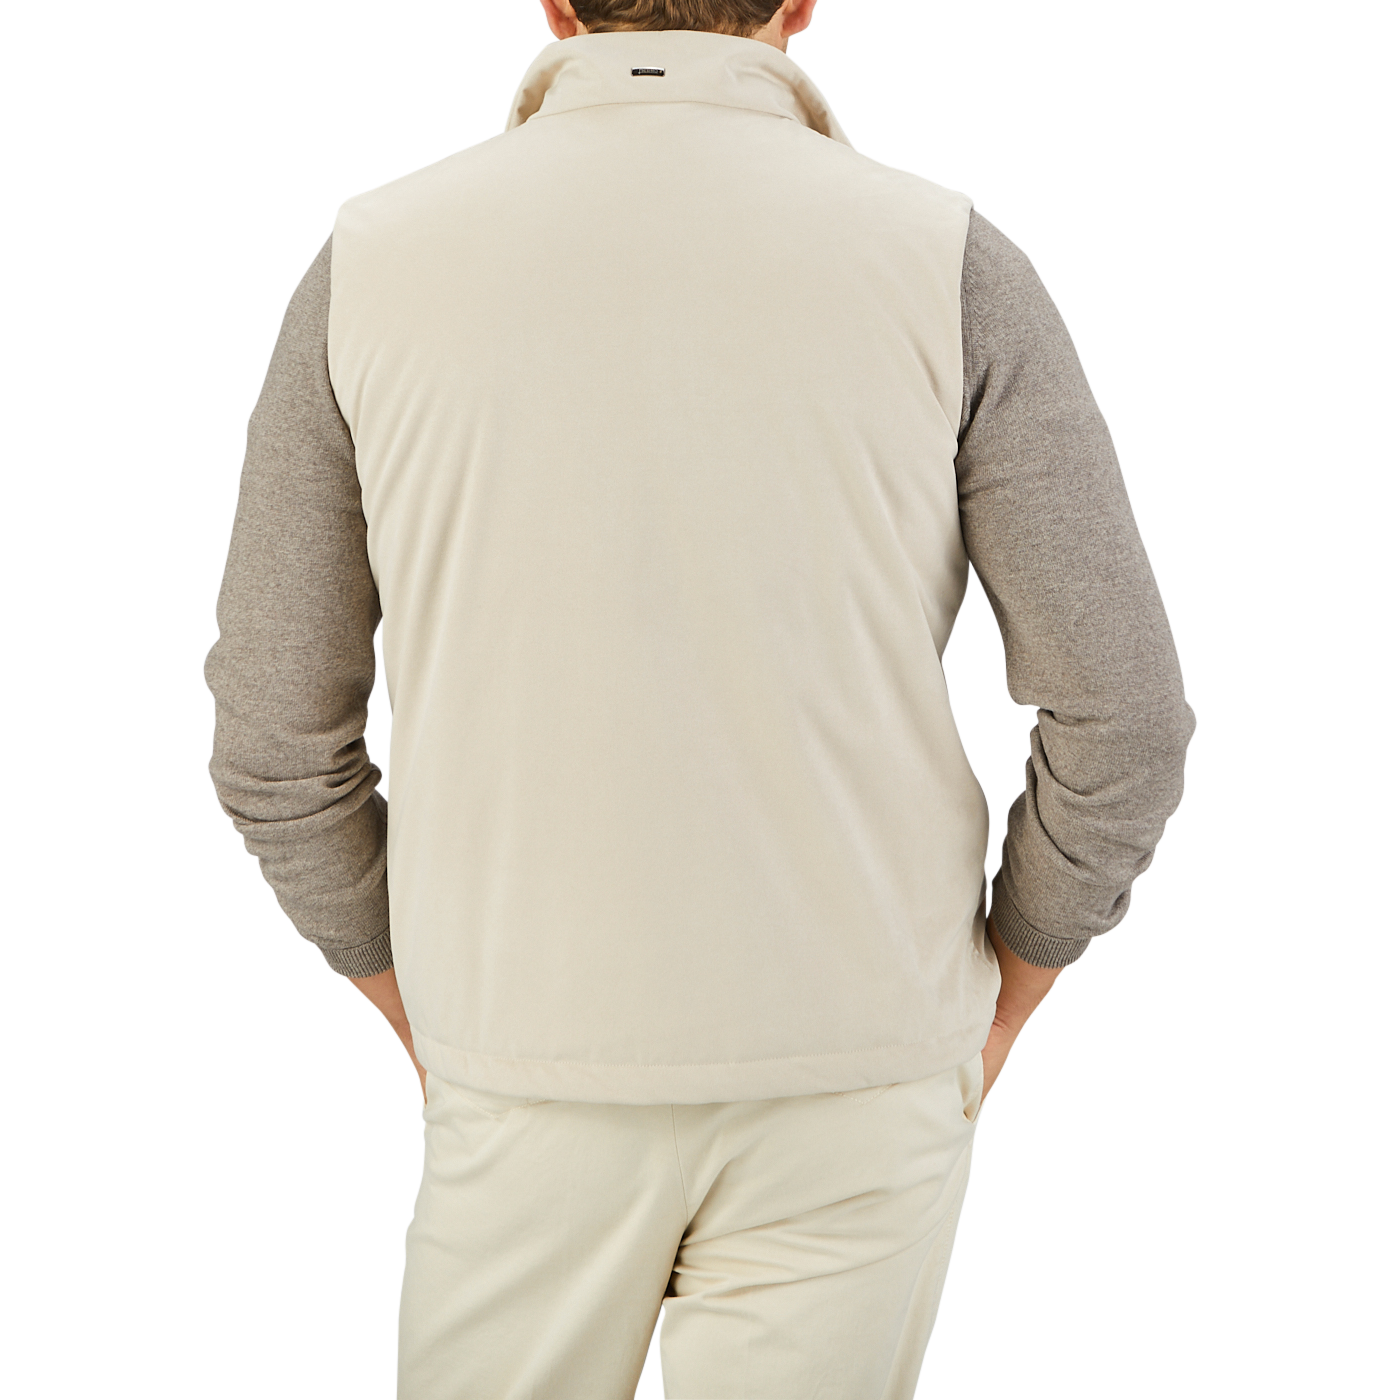 A person wearing a Herno Light Beige Suede Alcantara Zip Gilet over a gray long-sleeve shirt and light beige pants is photographed from the back against a plain background, showcasing a transitional style.